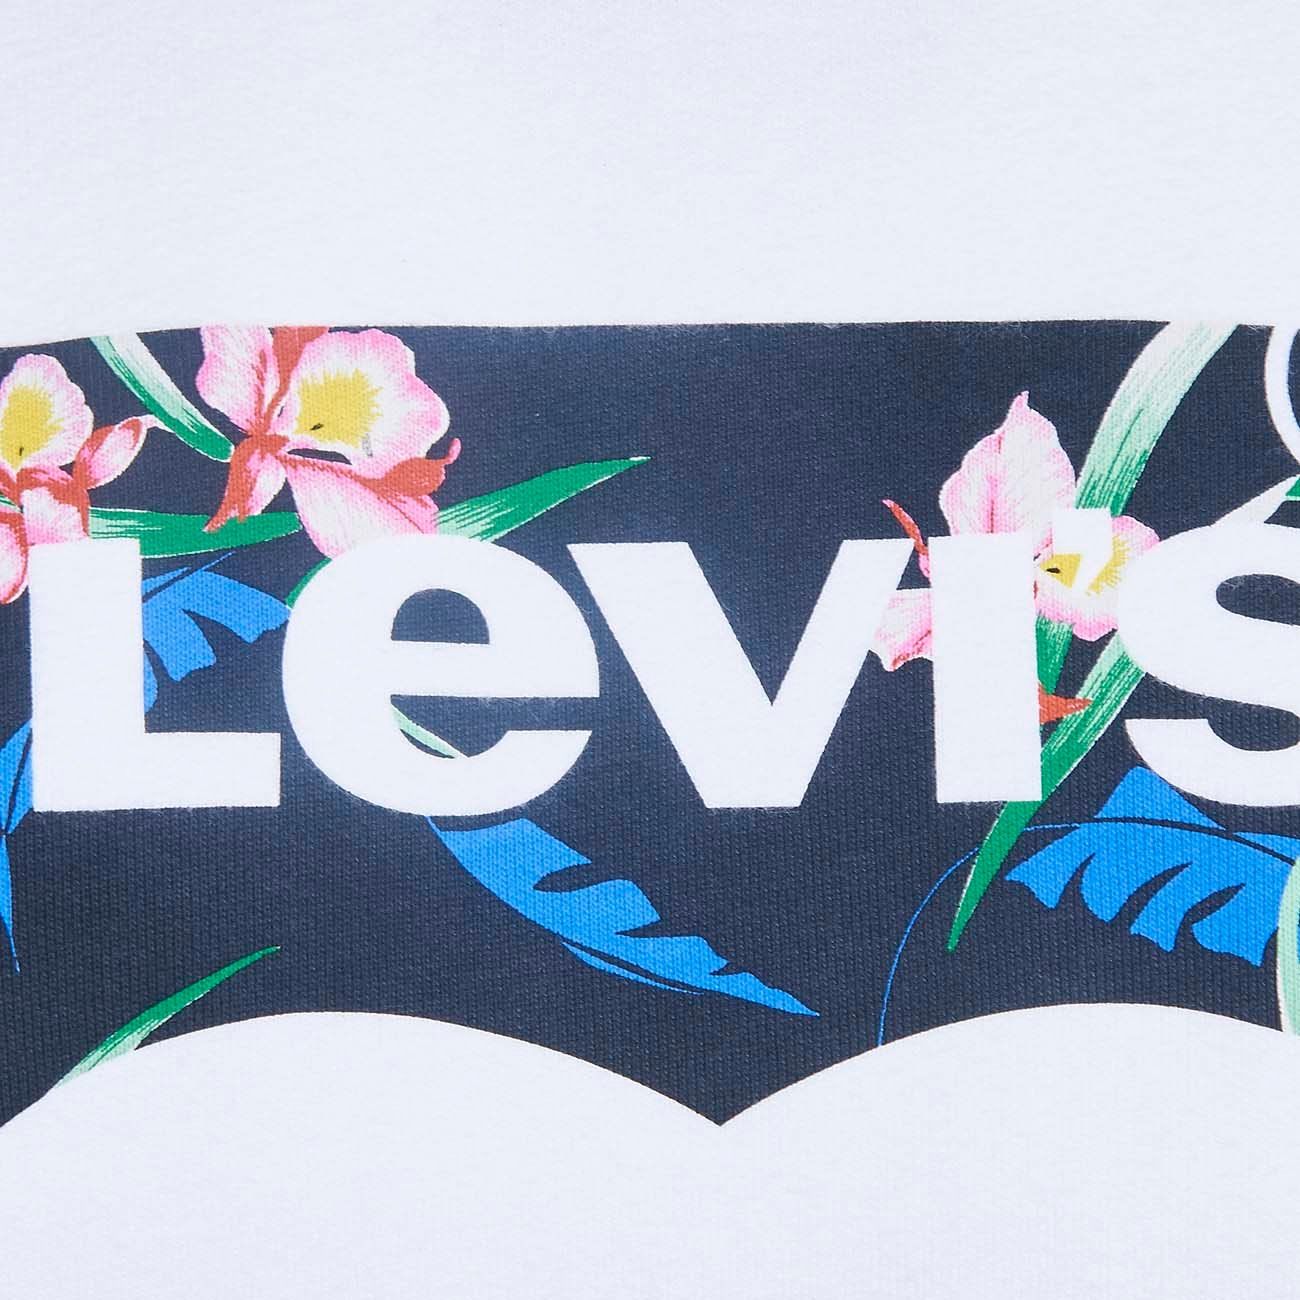 LEVIS GRAPHIC SPORT HOODIE WITH FLORAL LOGO Woman White Black Multicolor |  Mascheroni Sportswear